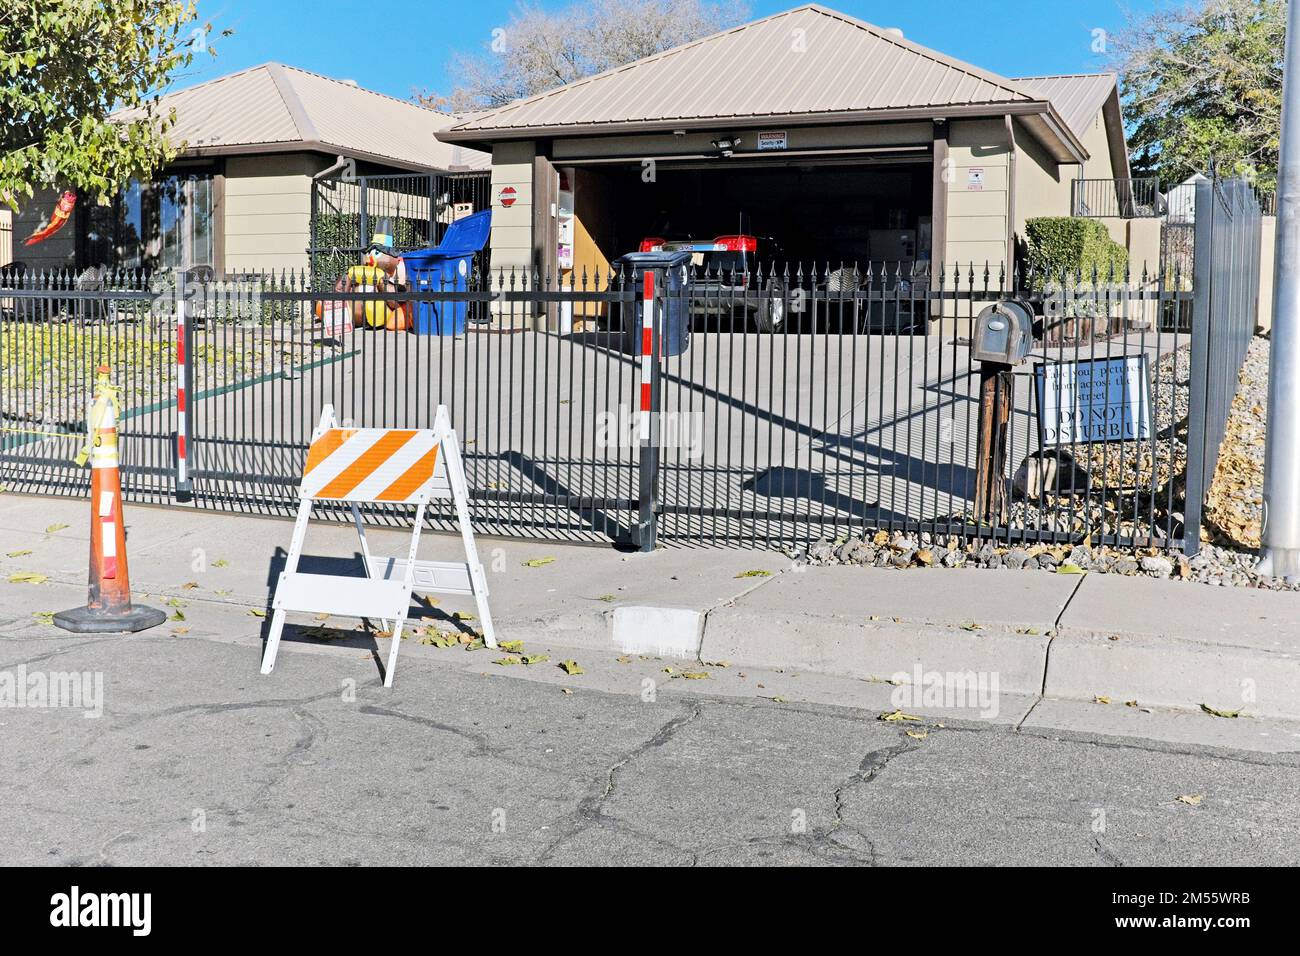 The house of Walter White and family in the 'Breaking Bad' series is a movie tourism attraction in Albuquerque, New Mexico. Stock Photo